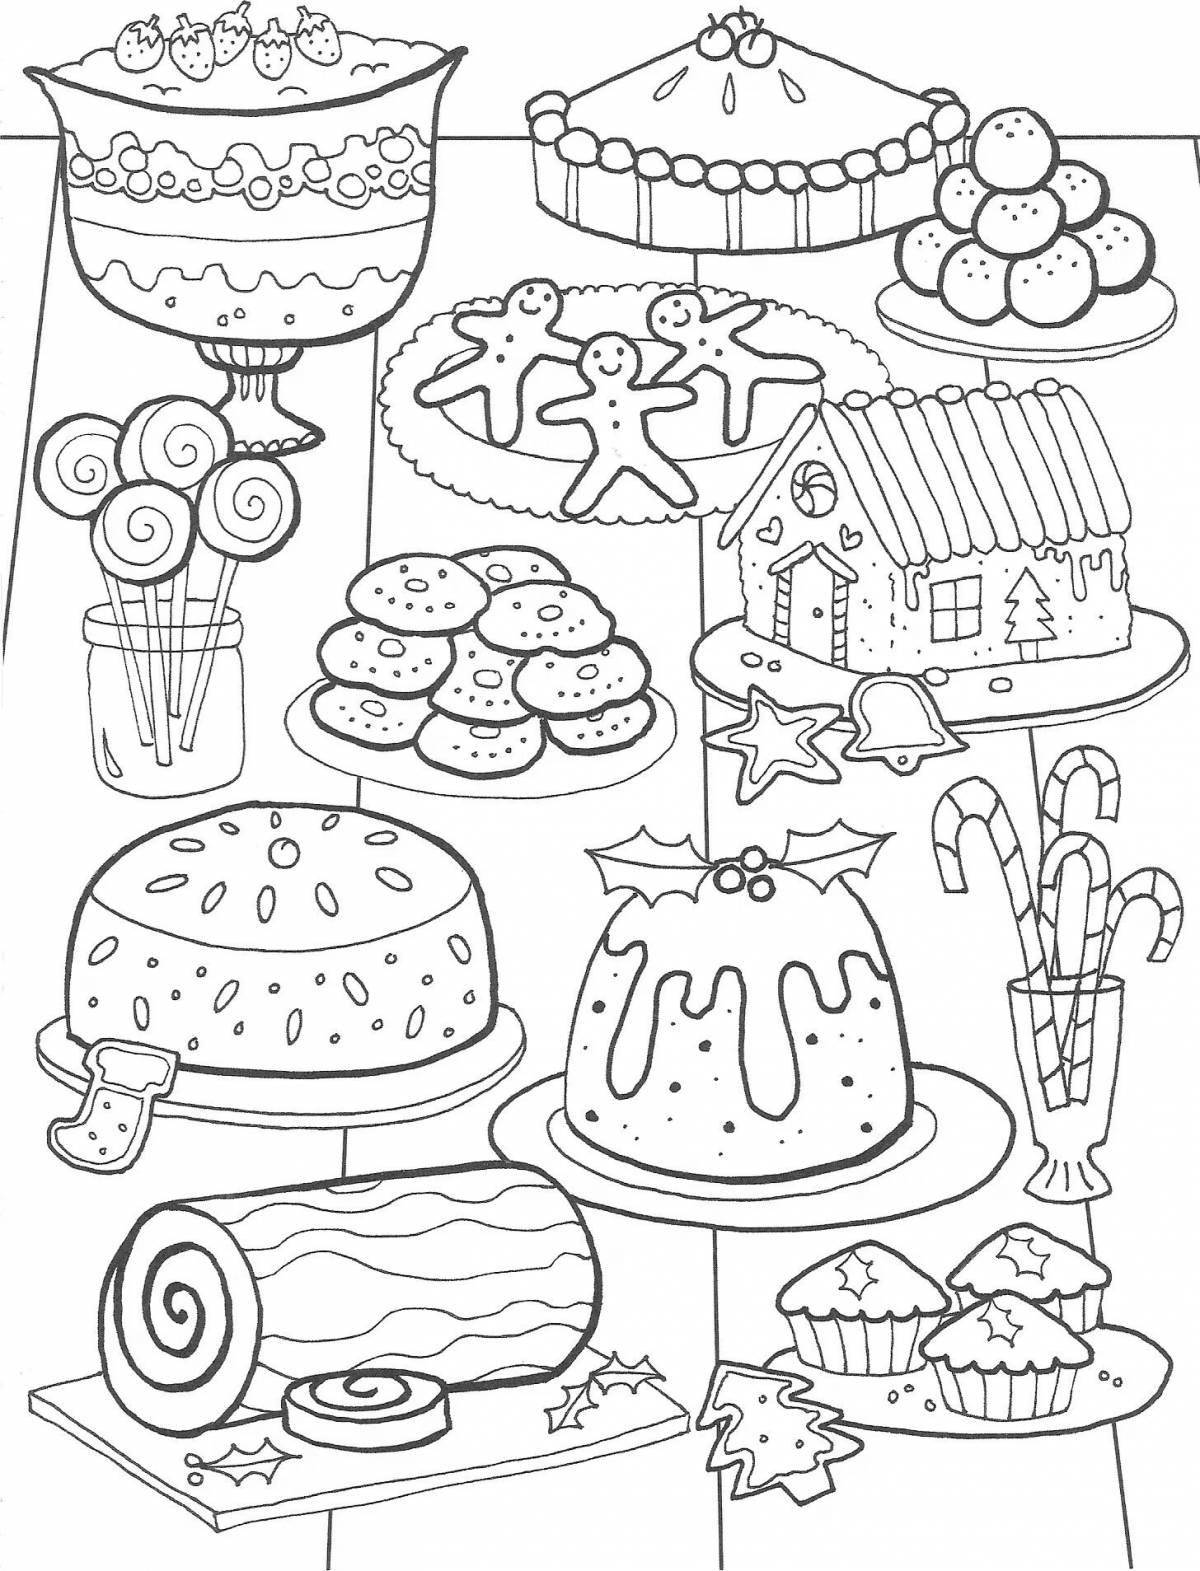 Coloring book recipes with colorful highlights